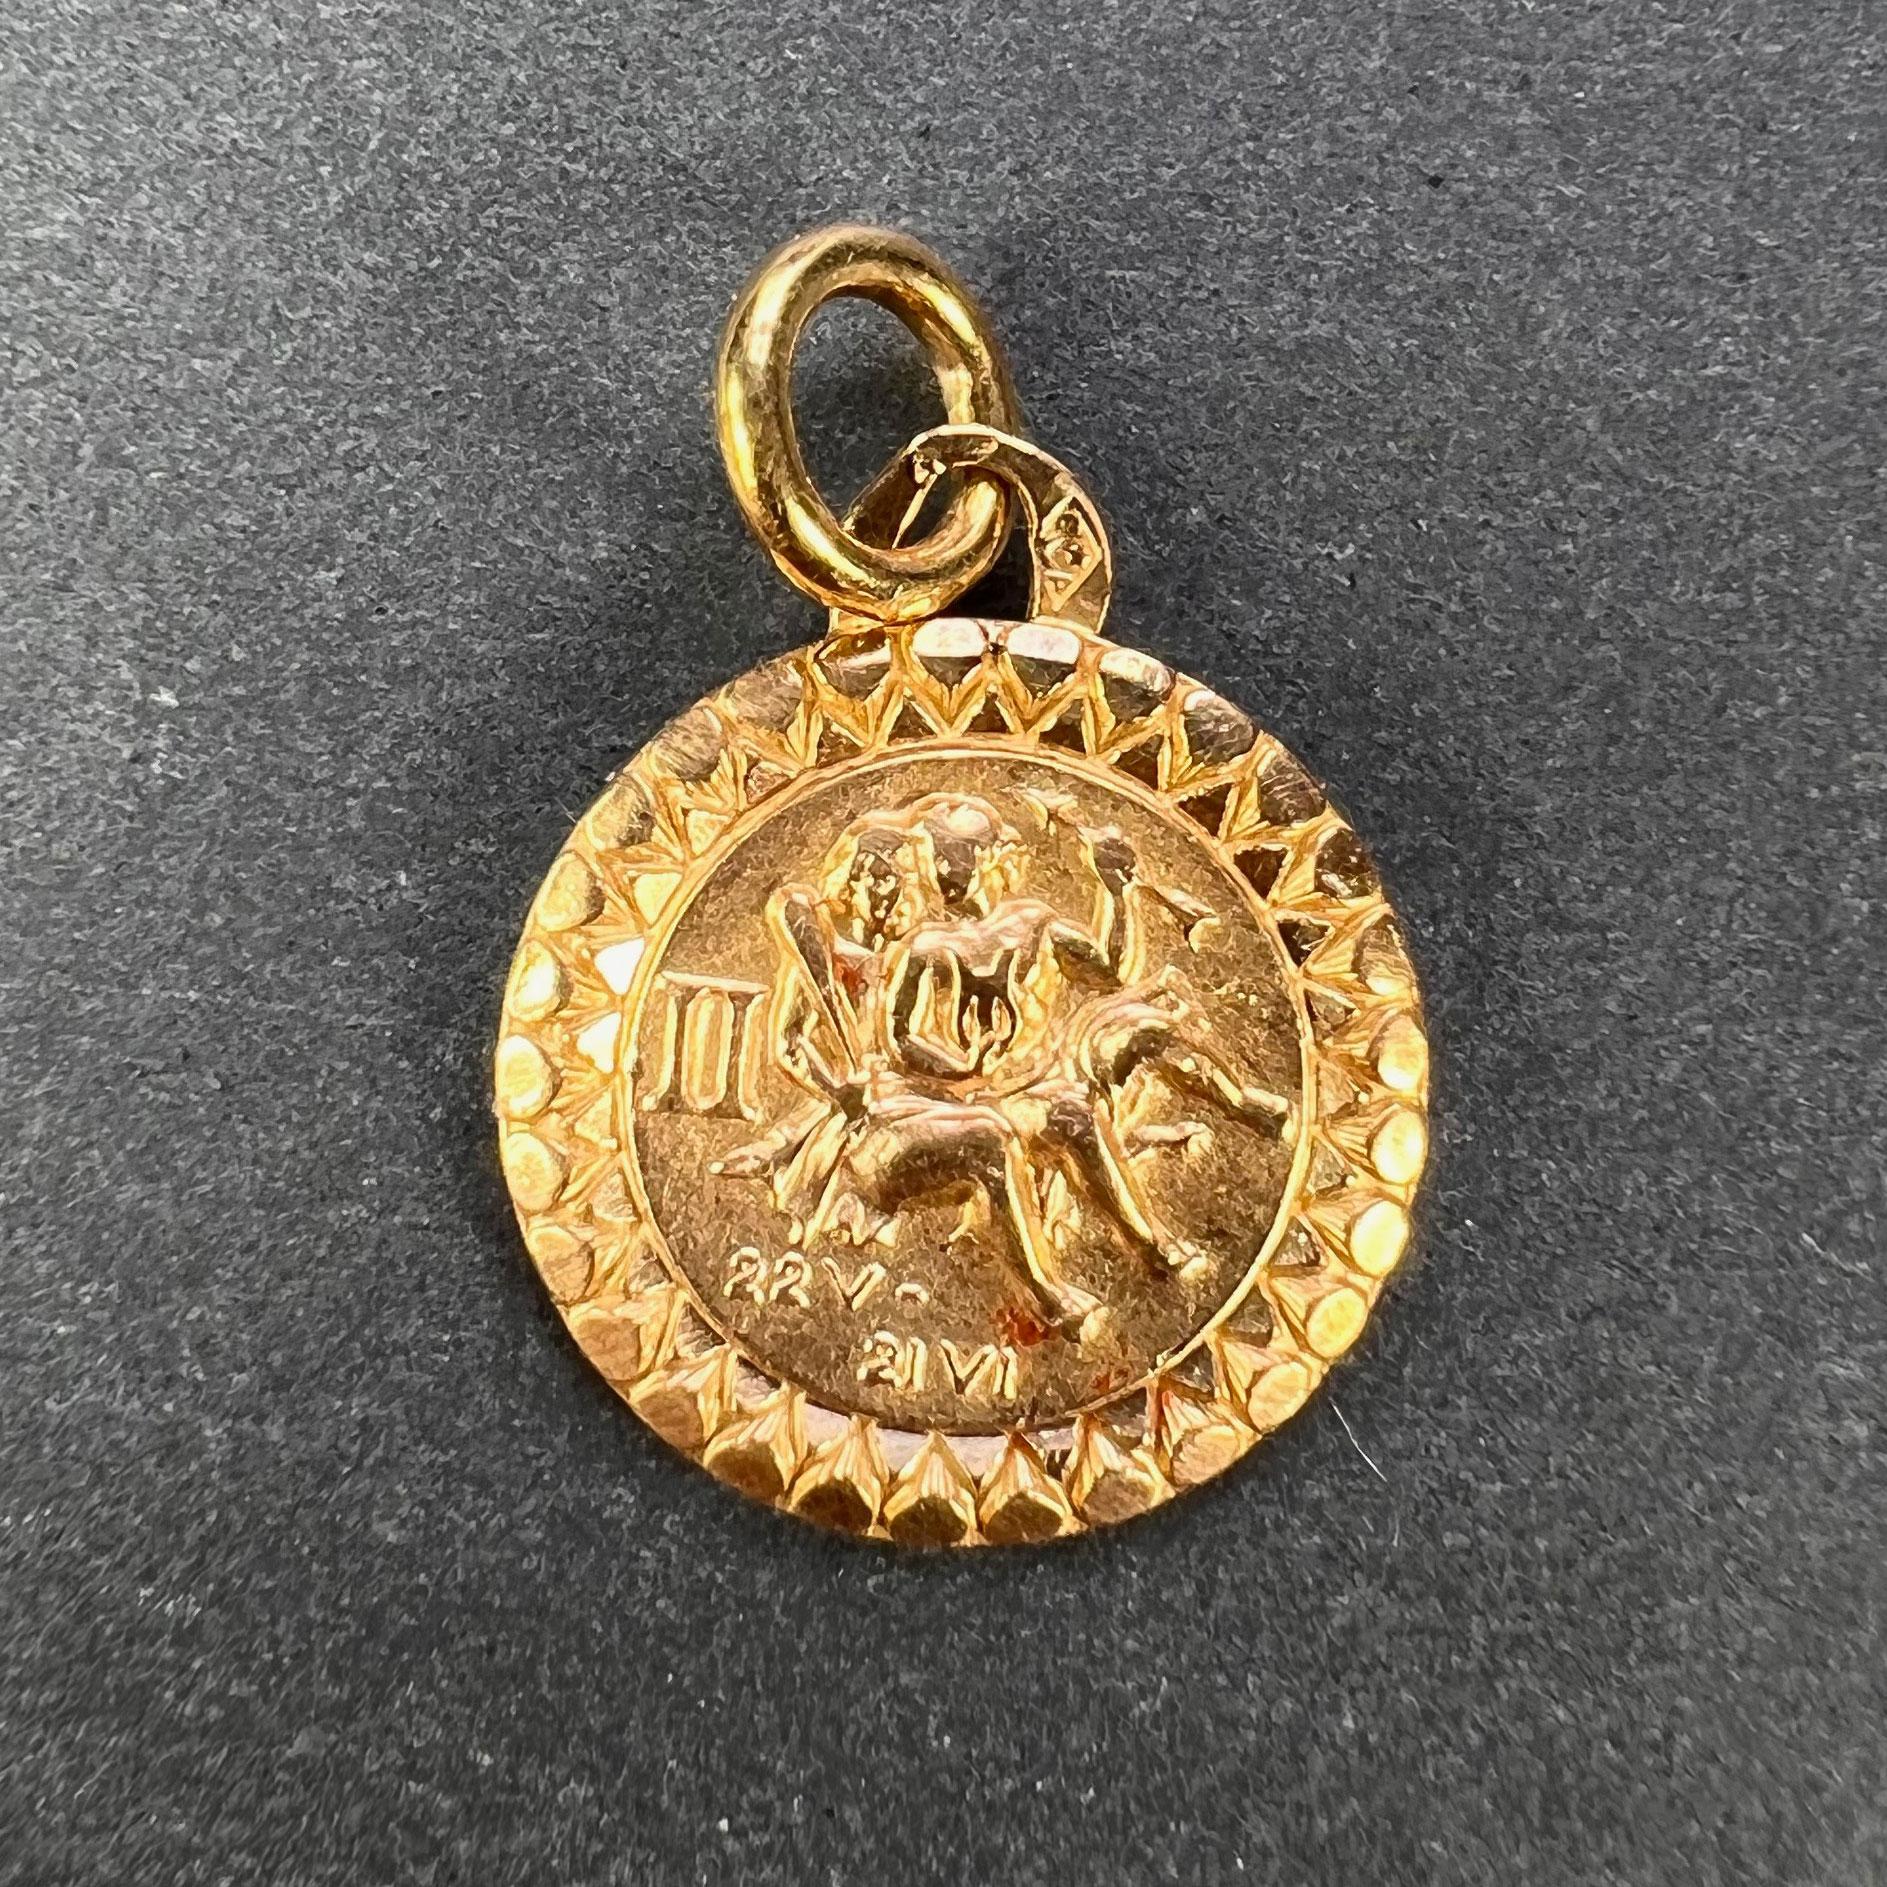 A French 18 karat (18K) yellow gold charm pendant designed as the Zodiac sign of Gemini. Stamped with the French eagle’s head for 18 karat gold and an unknown maker’s mark. 

Dimensions: 1.6 x 1.4 x 0.15 cm
Weight: 1.26 grams
